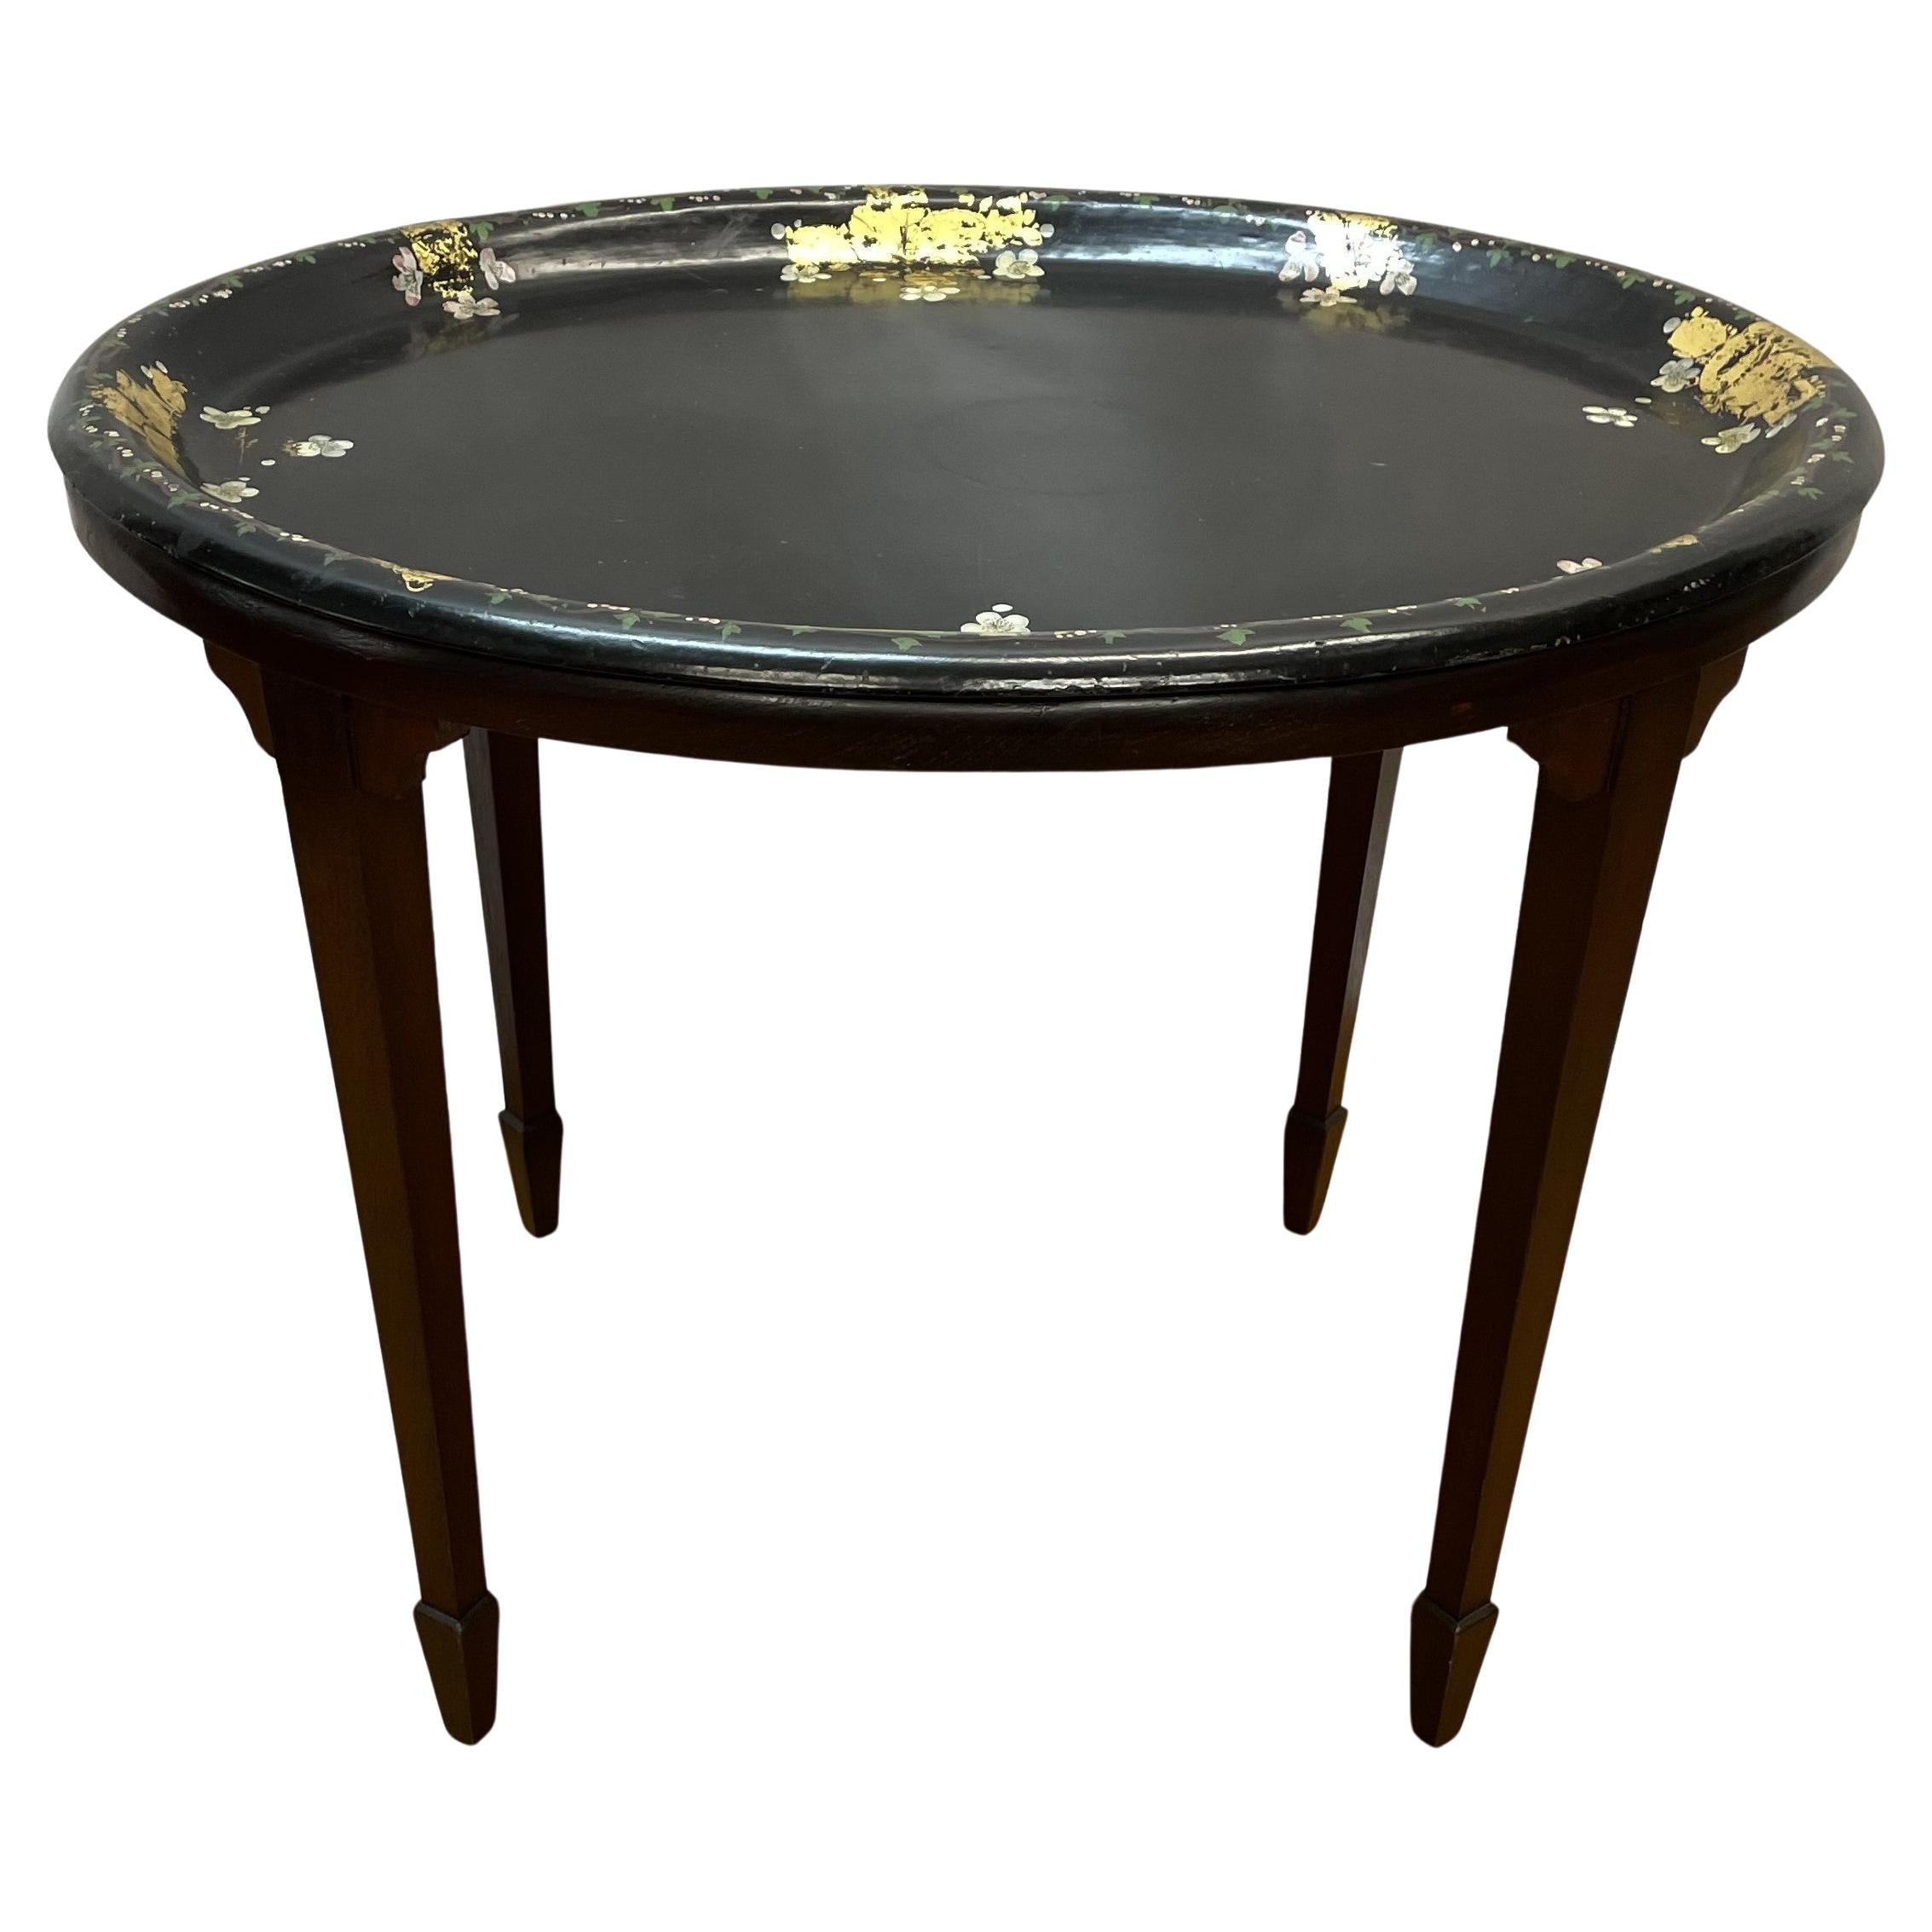 19th century paper cache painted oval tray on later stand